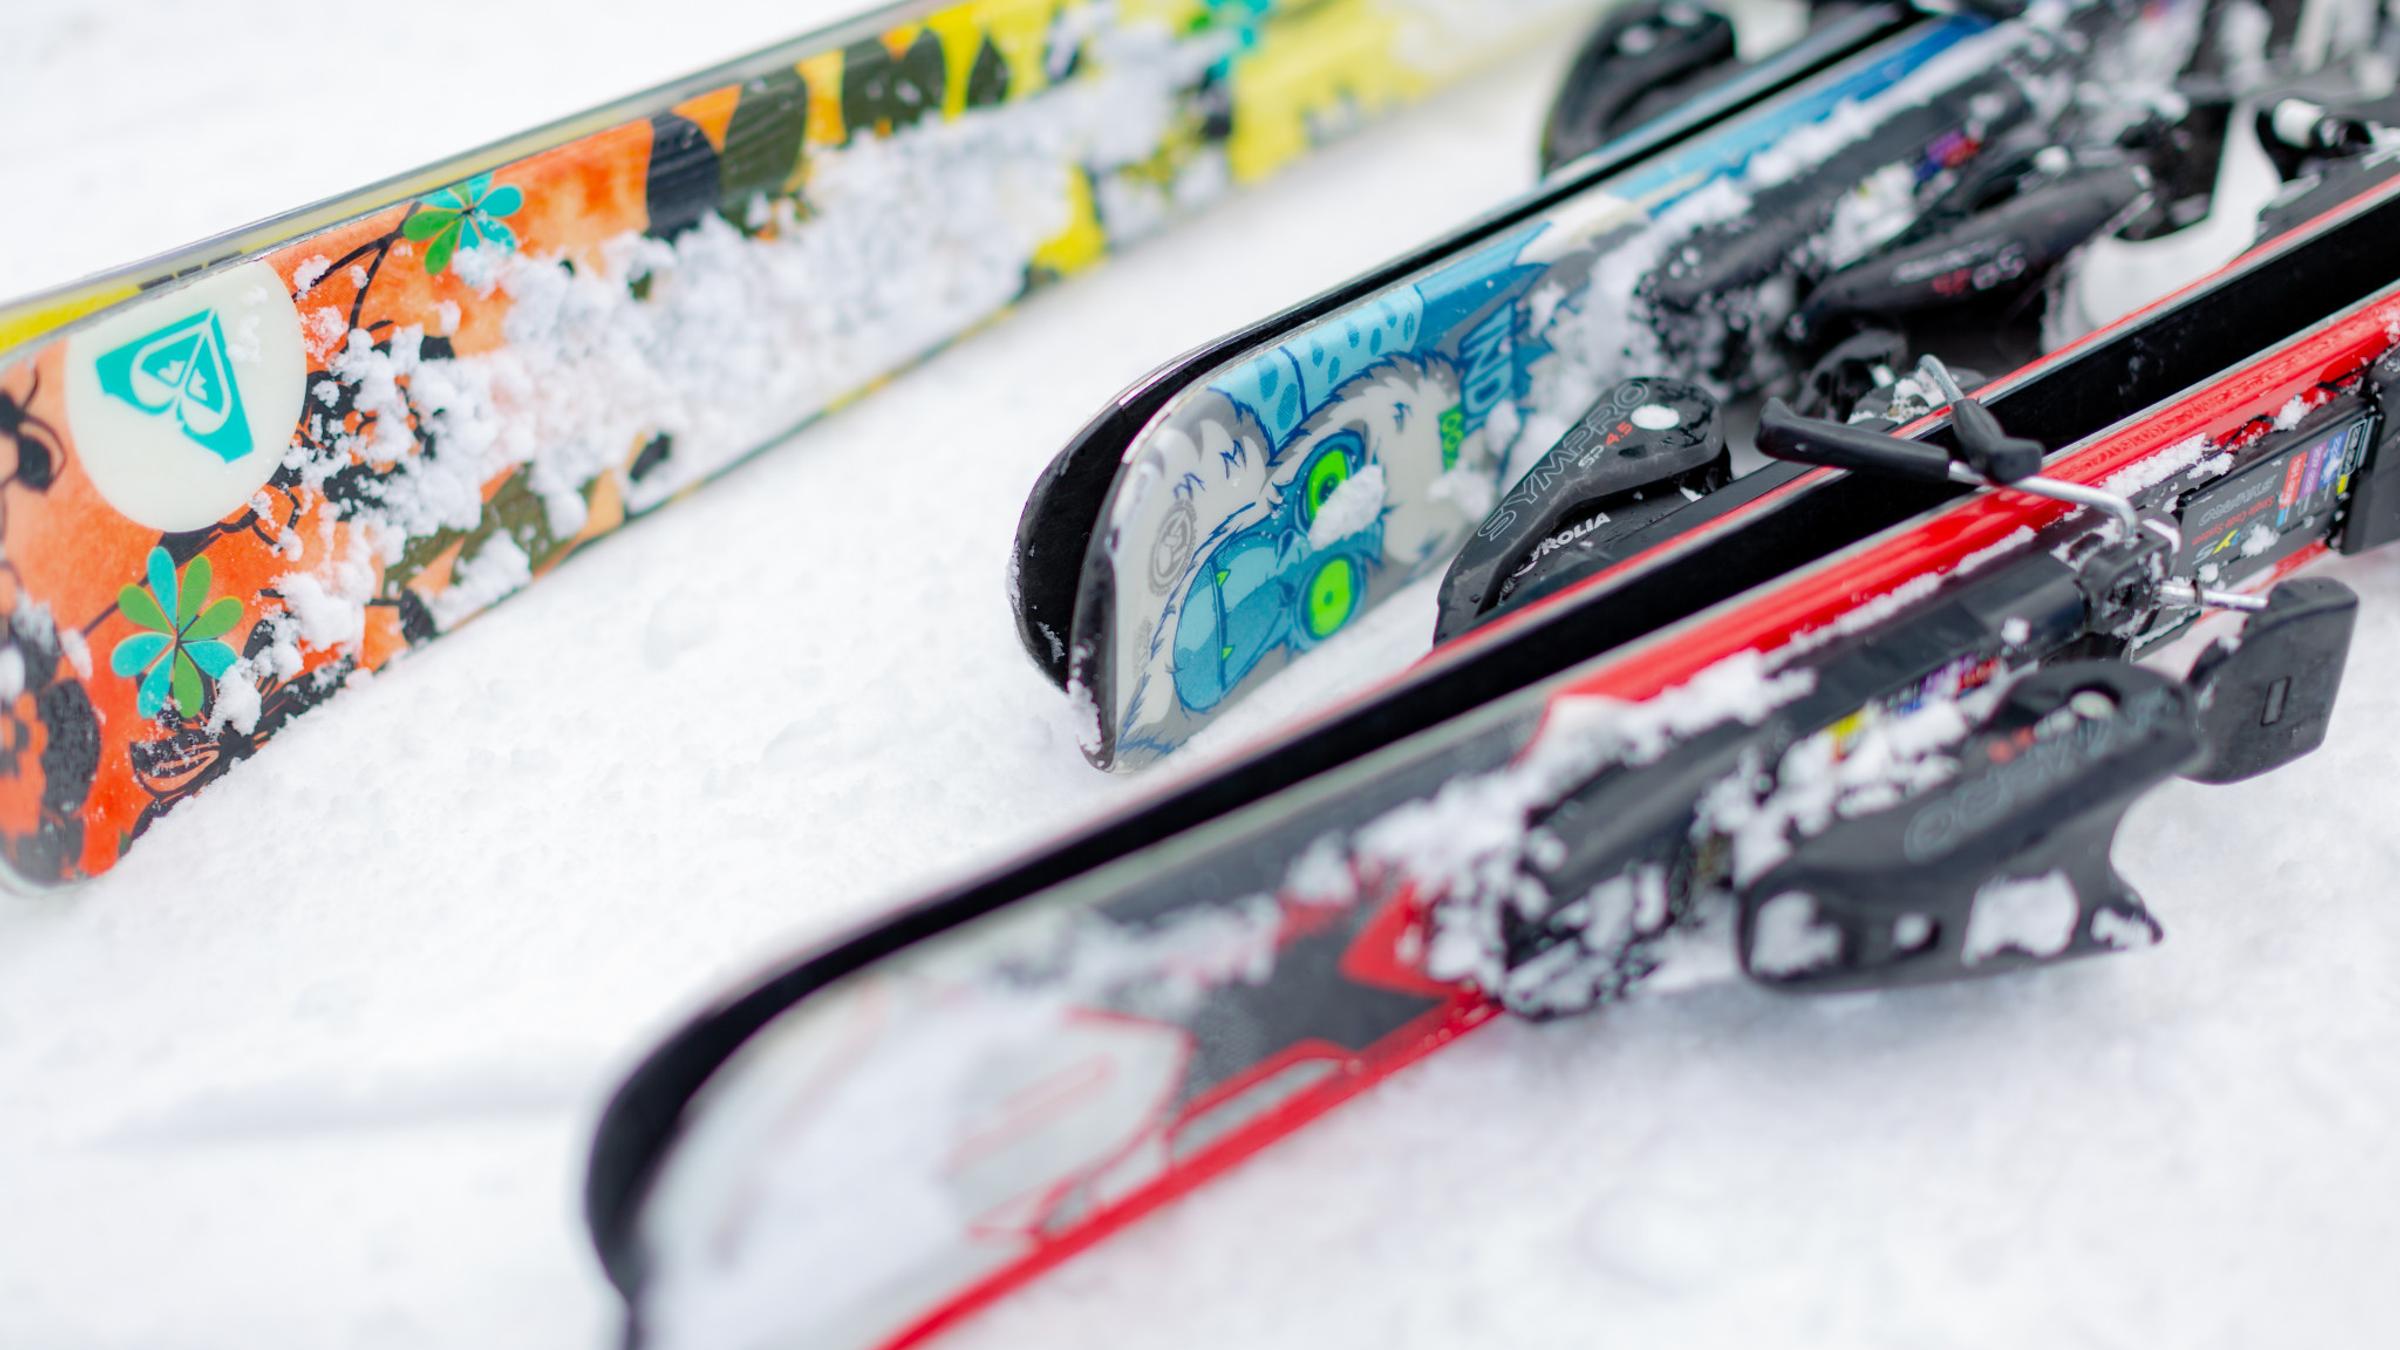 Skis laying on the snow.